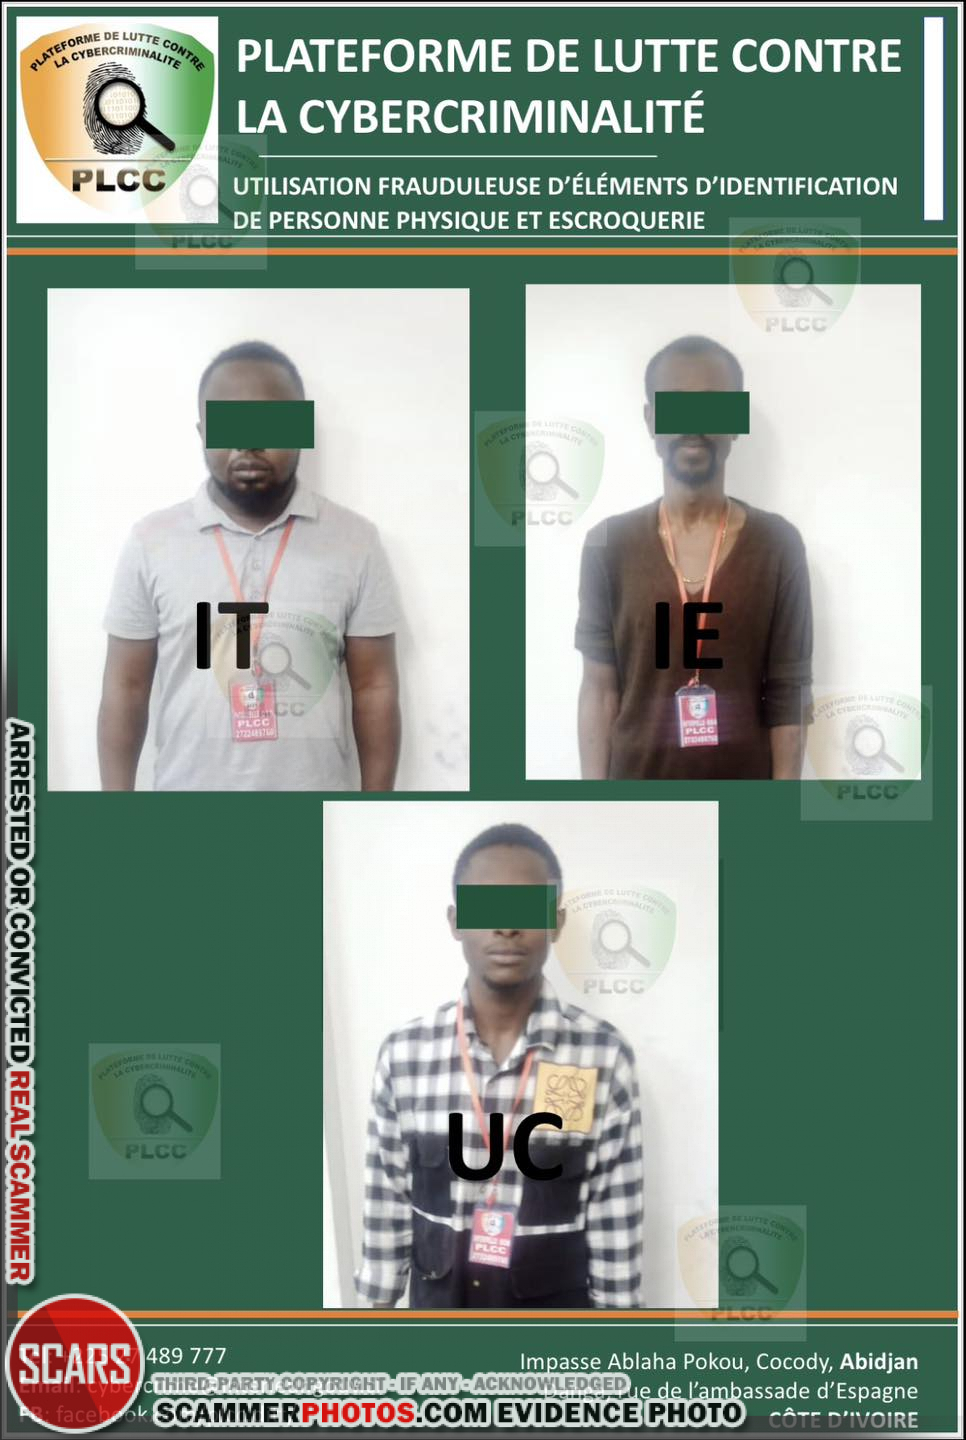 Gallery Of Arrested Scammers From Africa - May/June 2023